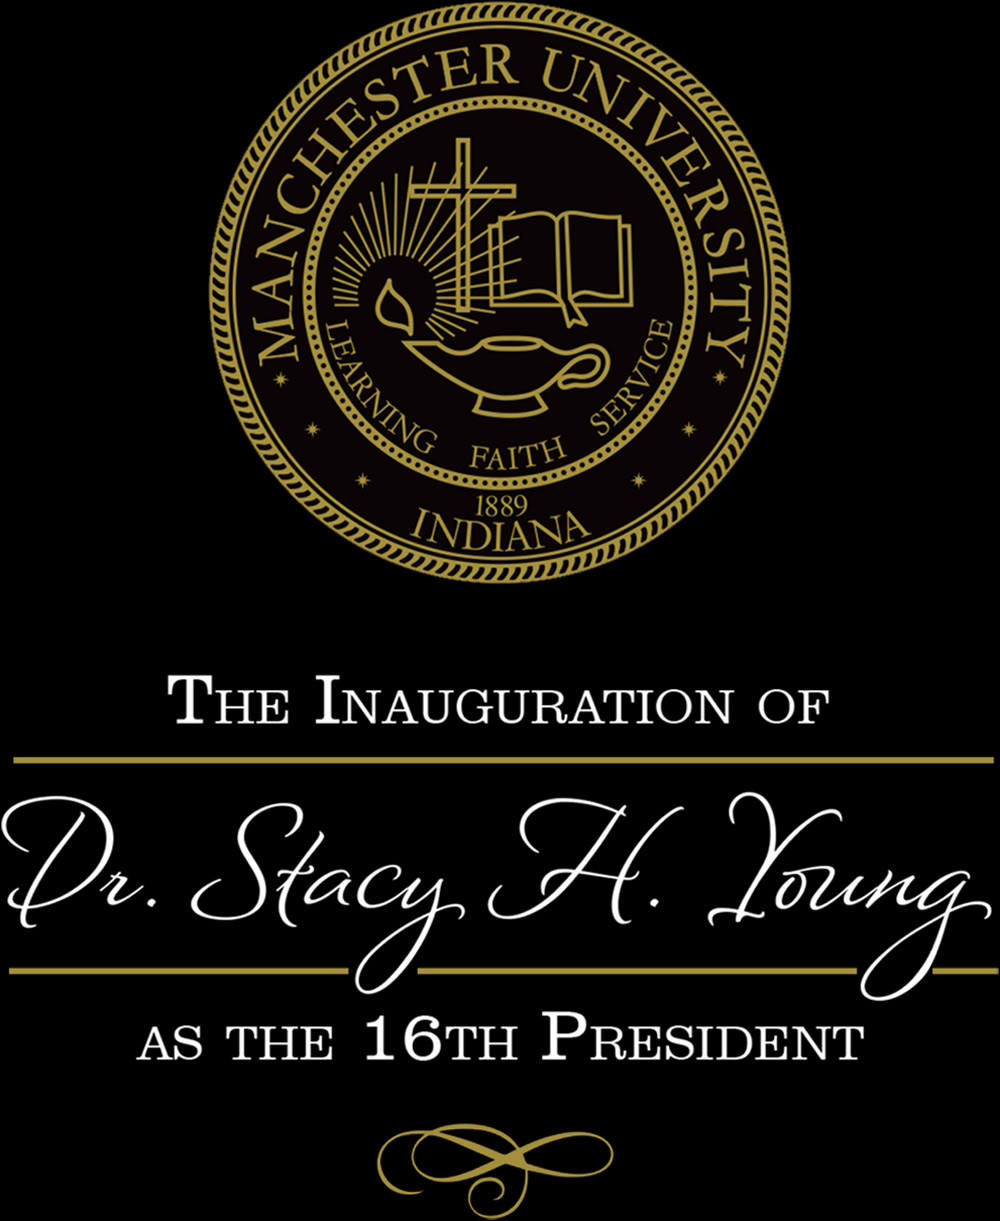 Manchester University seal with typography reading: The Inauguration of Dr. Stacy H. Young as the 16th President